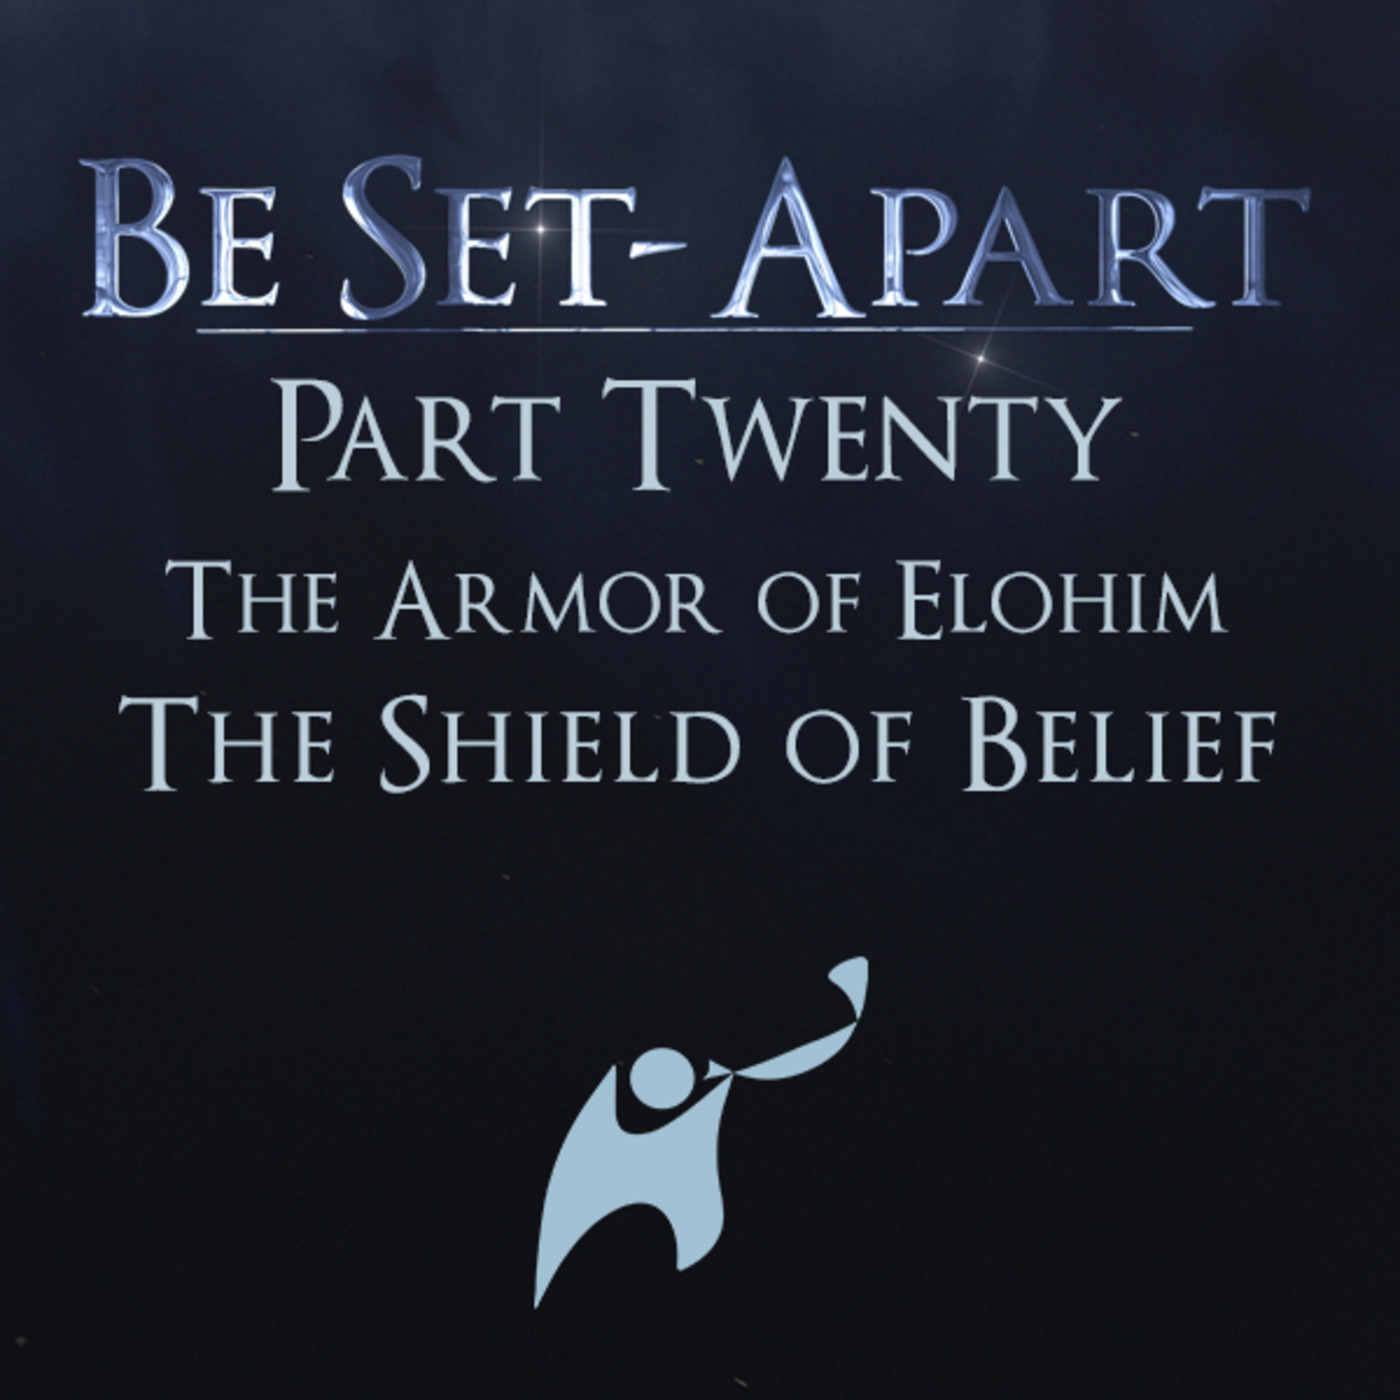 Episode 811: Be Set-Apart | Part Twenty | The Armor of Elohim | The Shield of Belief